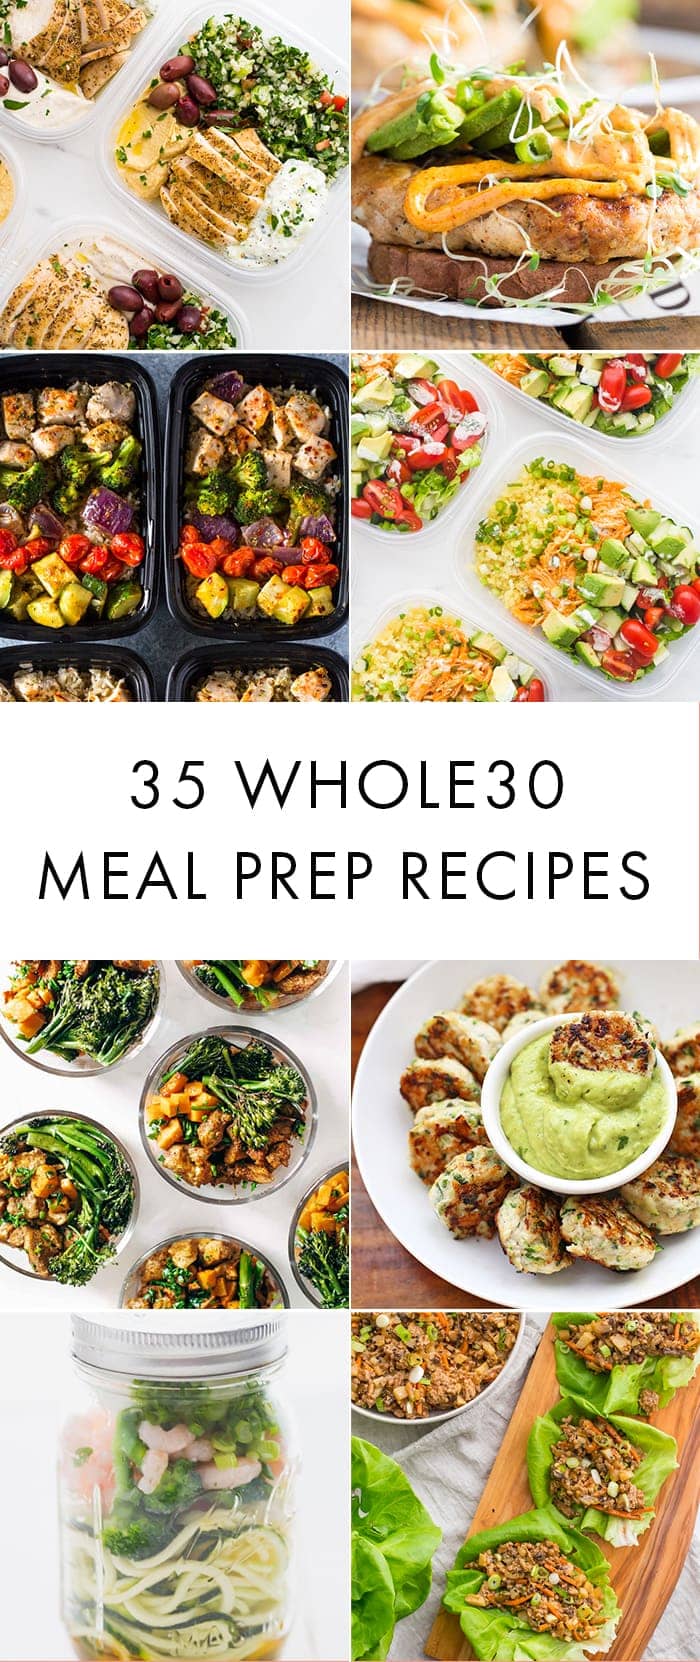 35 Whole30 Meal Prep Recipes (Whole Breakfasts, Whole30 Lunches)